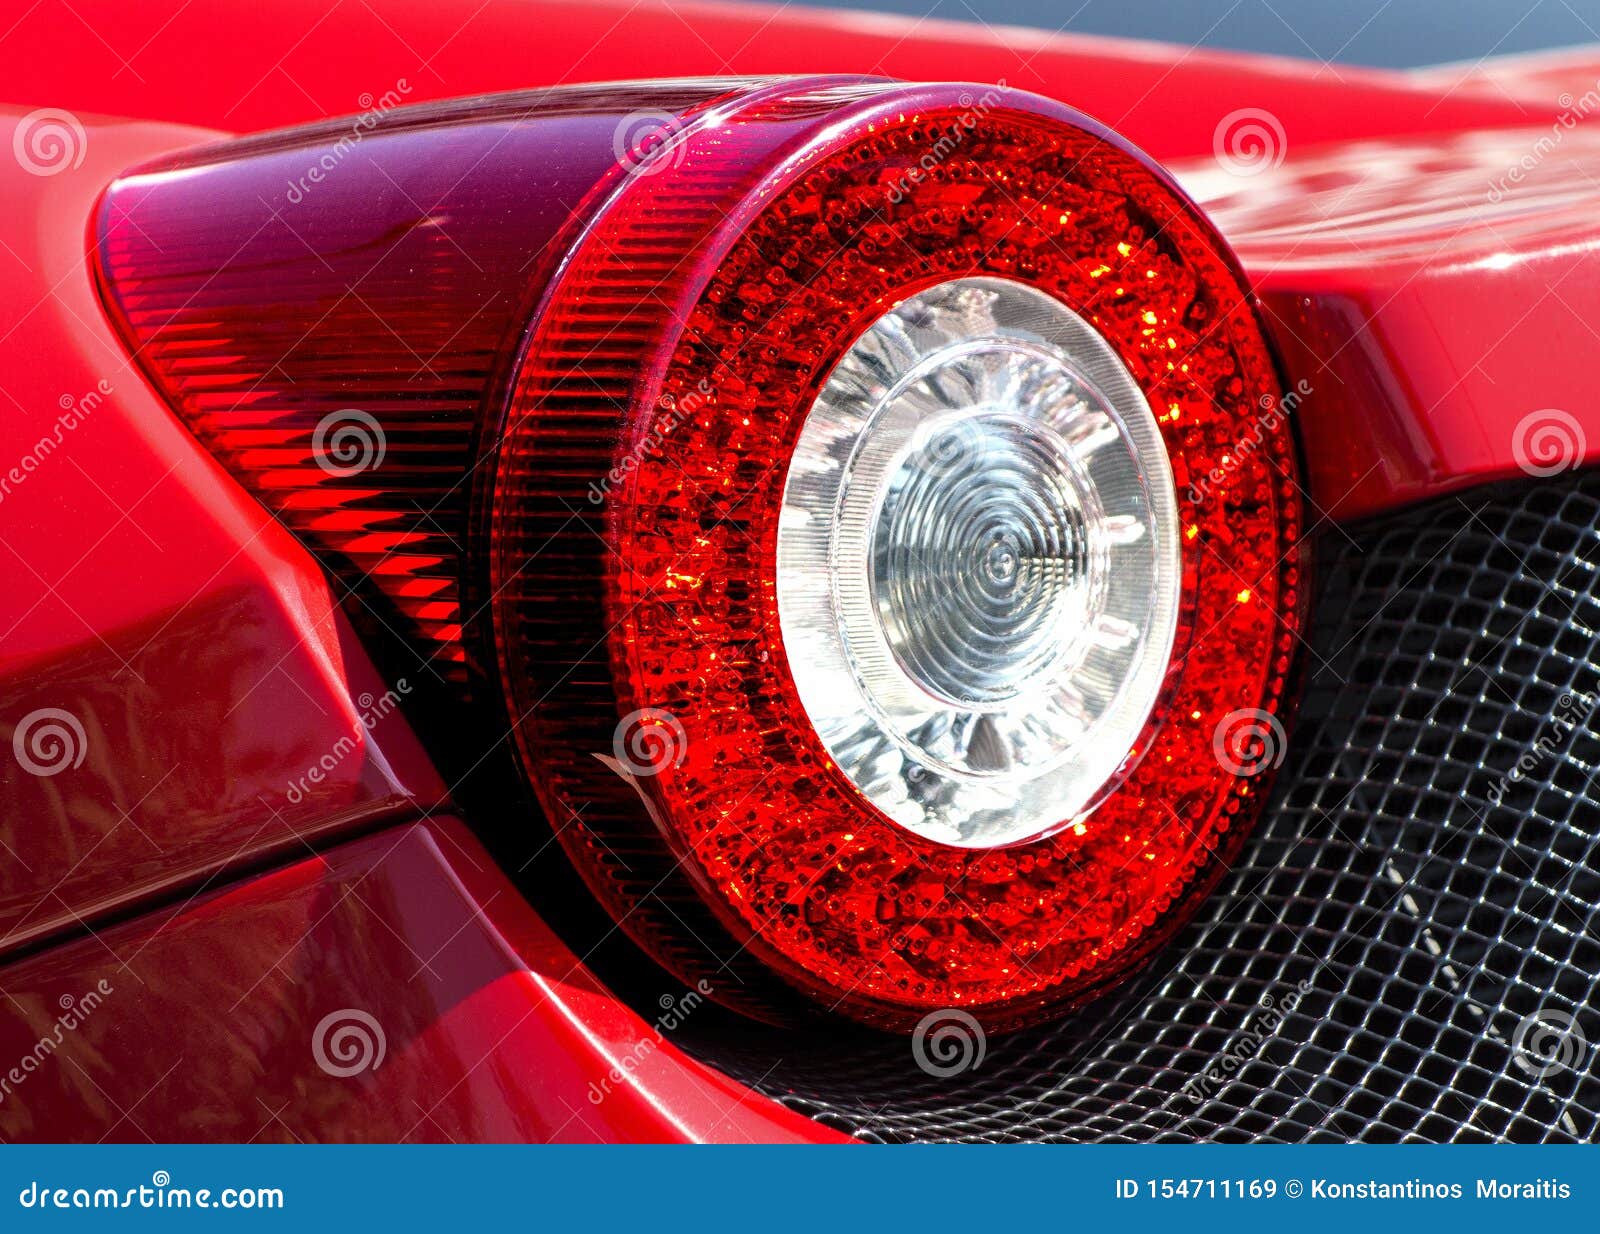 round tail lights editorial image. Image of detail